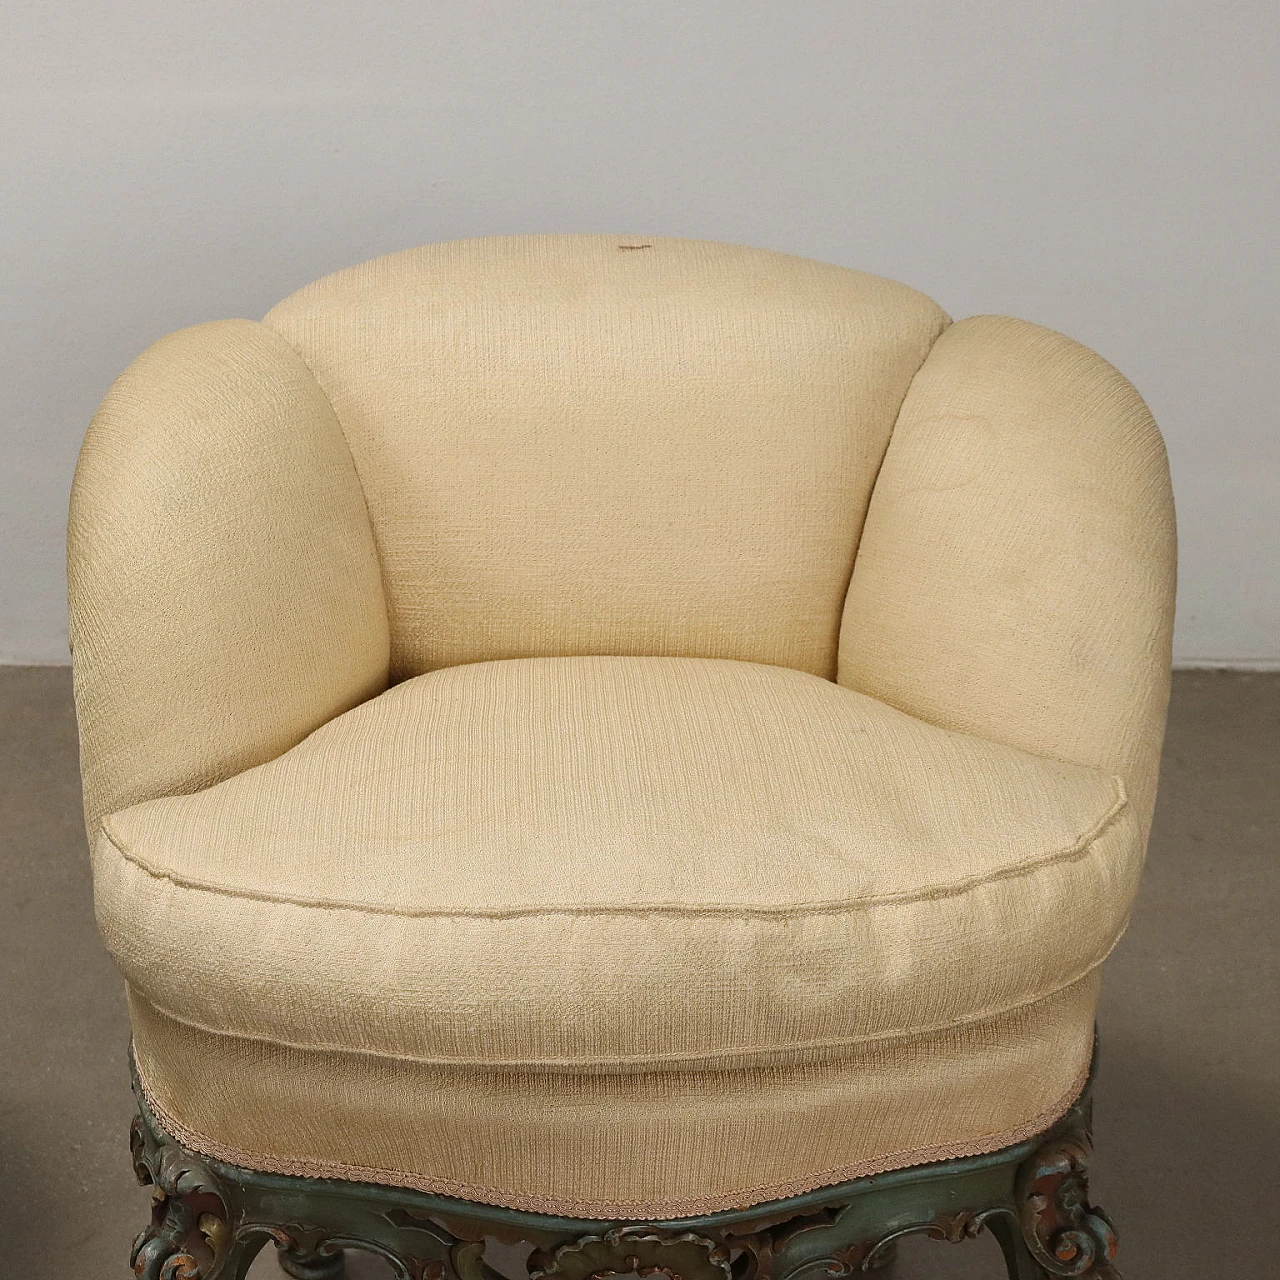 3 Laquered wood armchairs with wavy legs and rocaille motifs 5